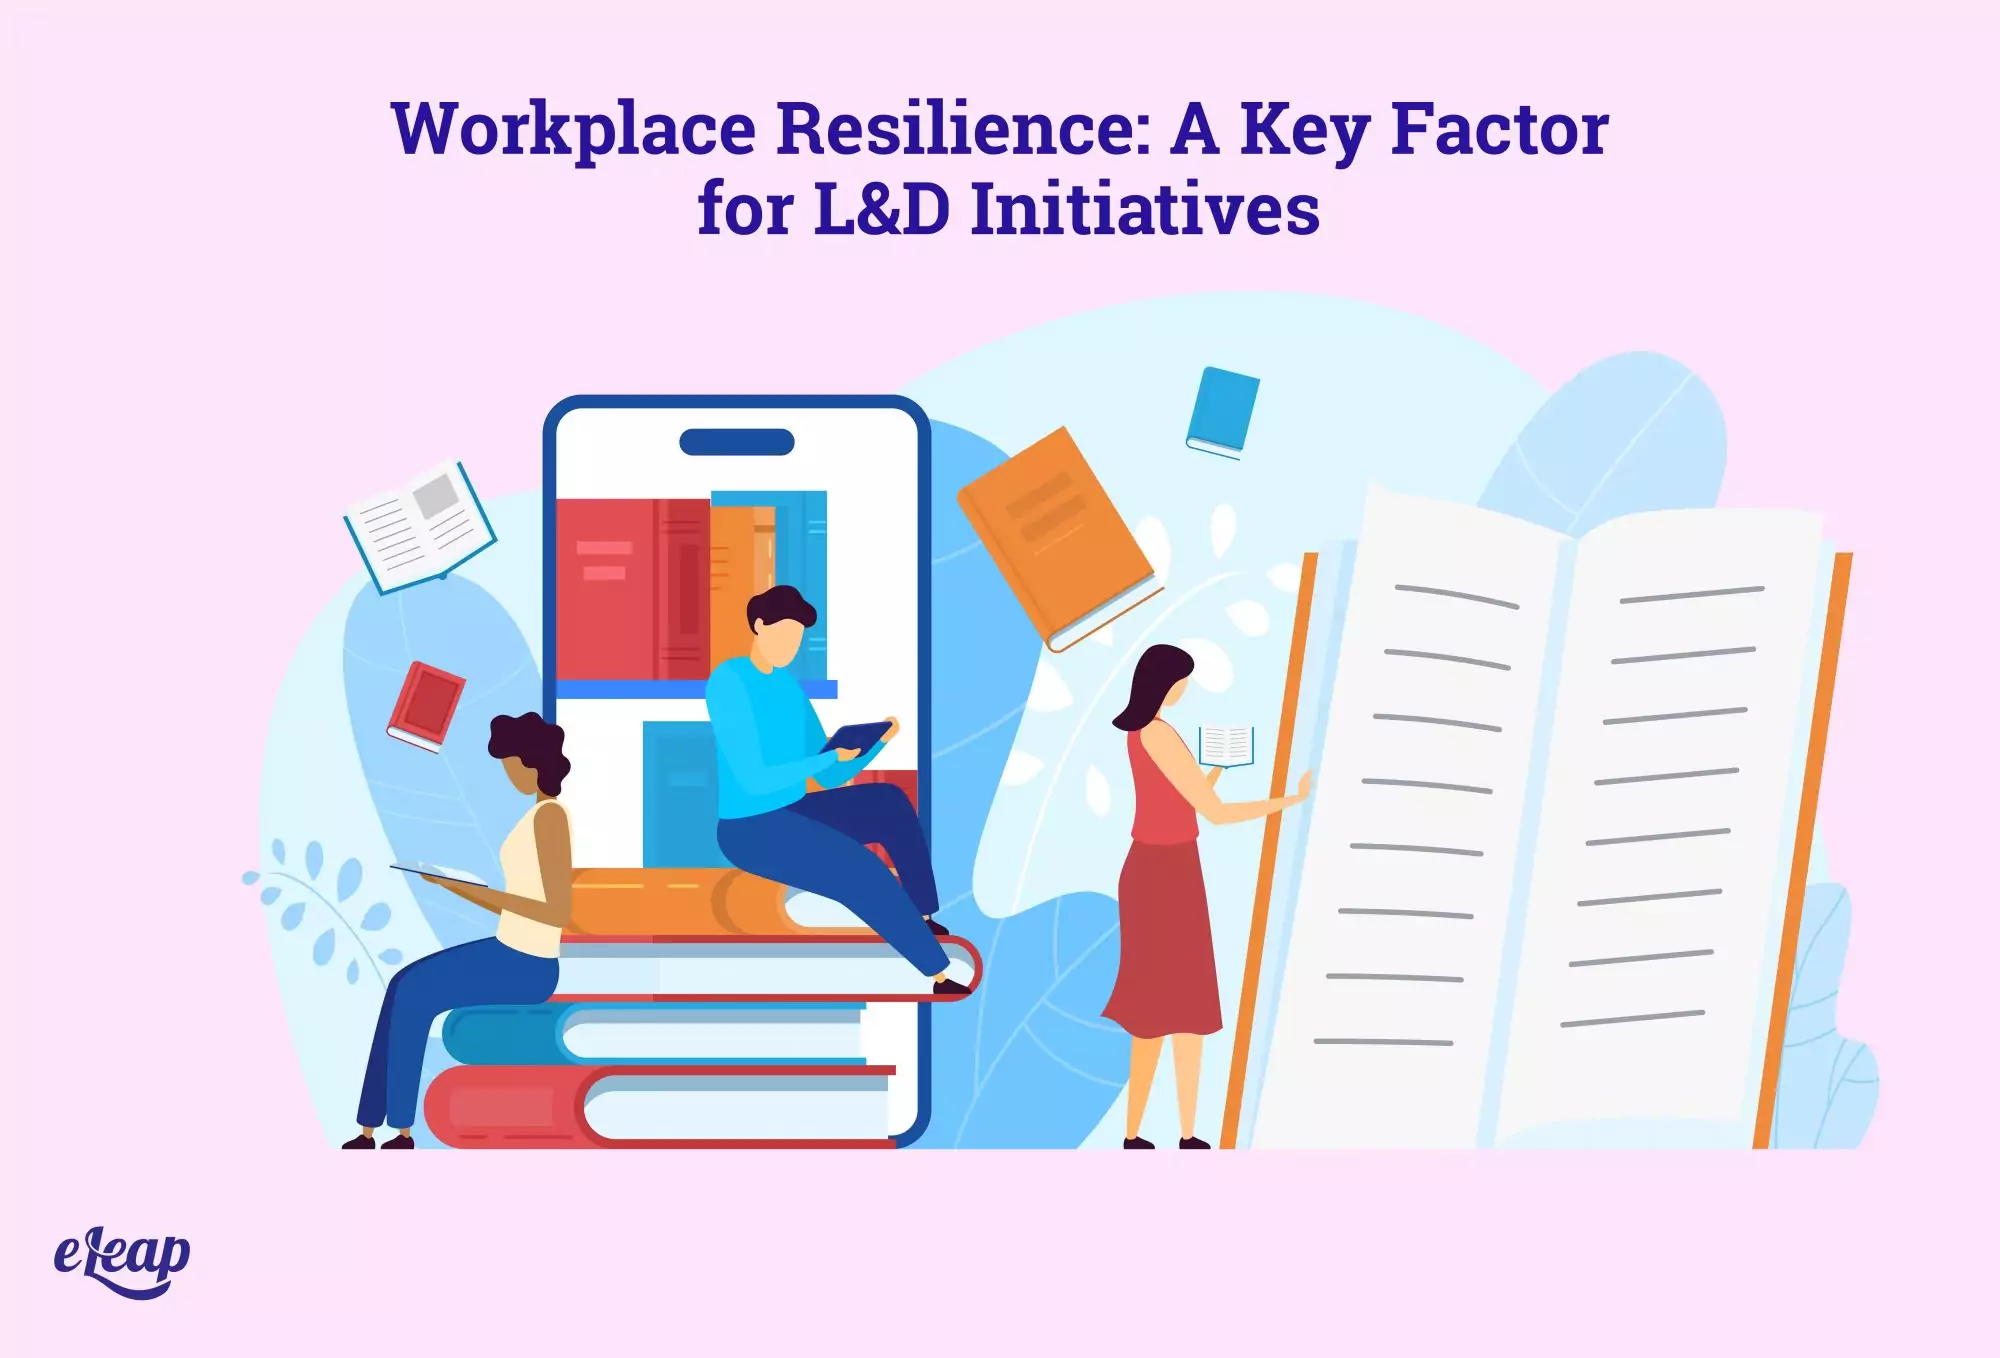 Workplace Resilience: A Key Factor for L&D Initiatives